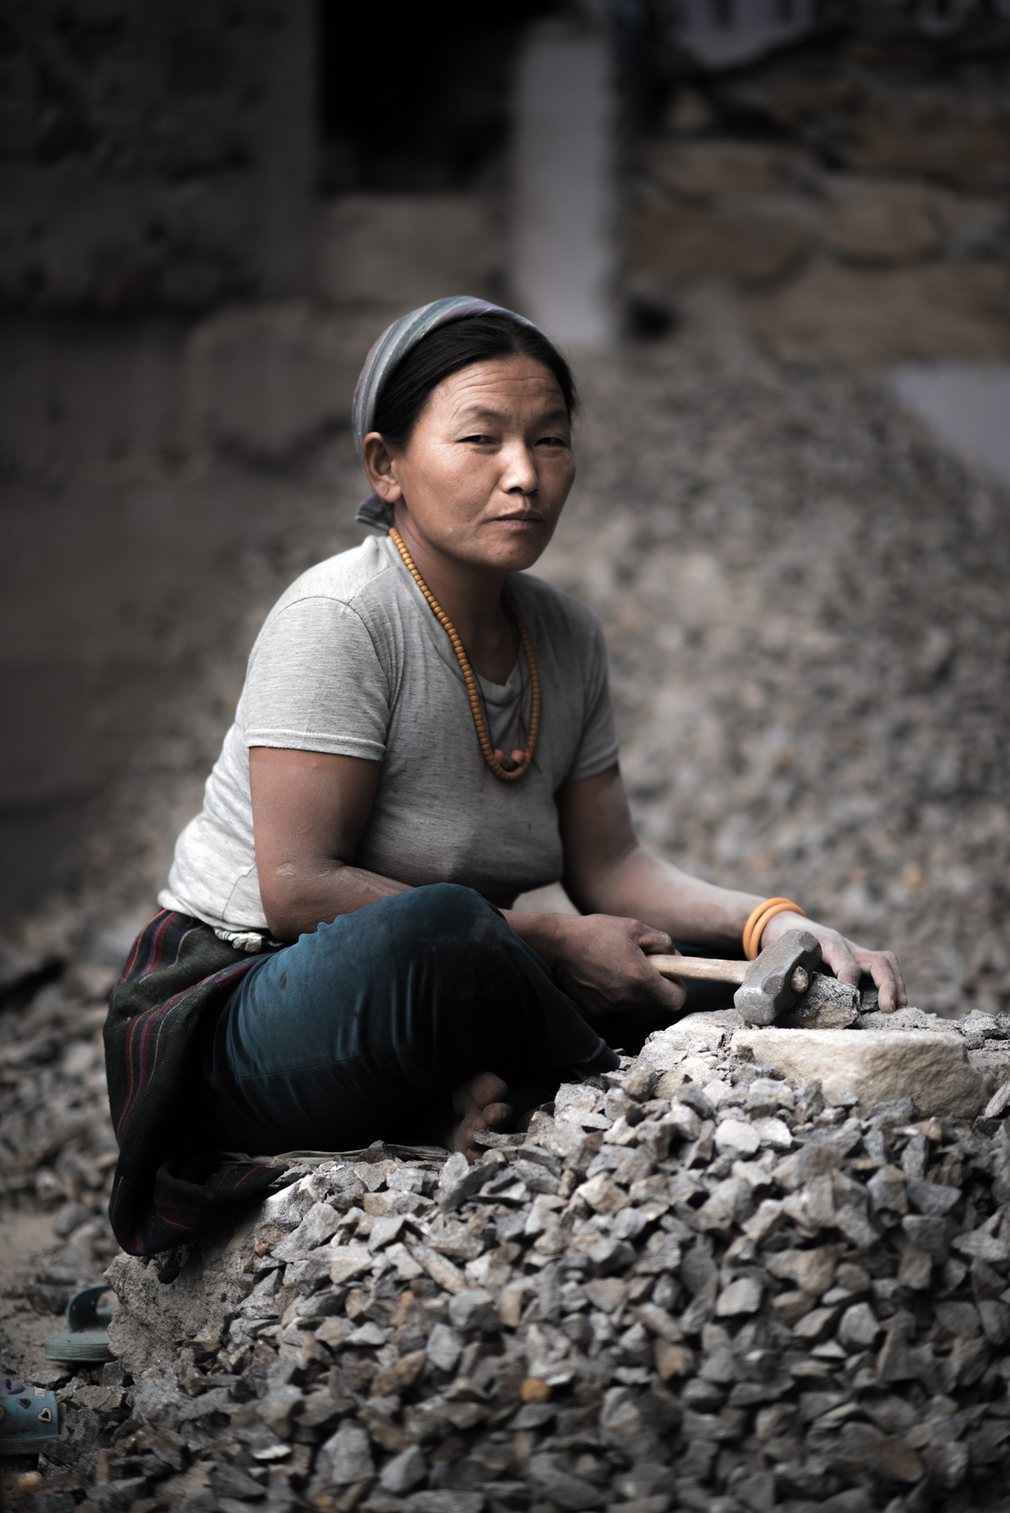 Surrounded by shingle, Chhiring begins the task of rebuilding her house in Thulo Shyaphru